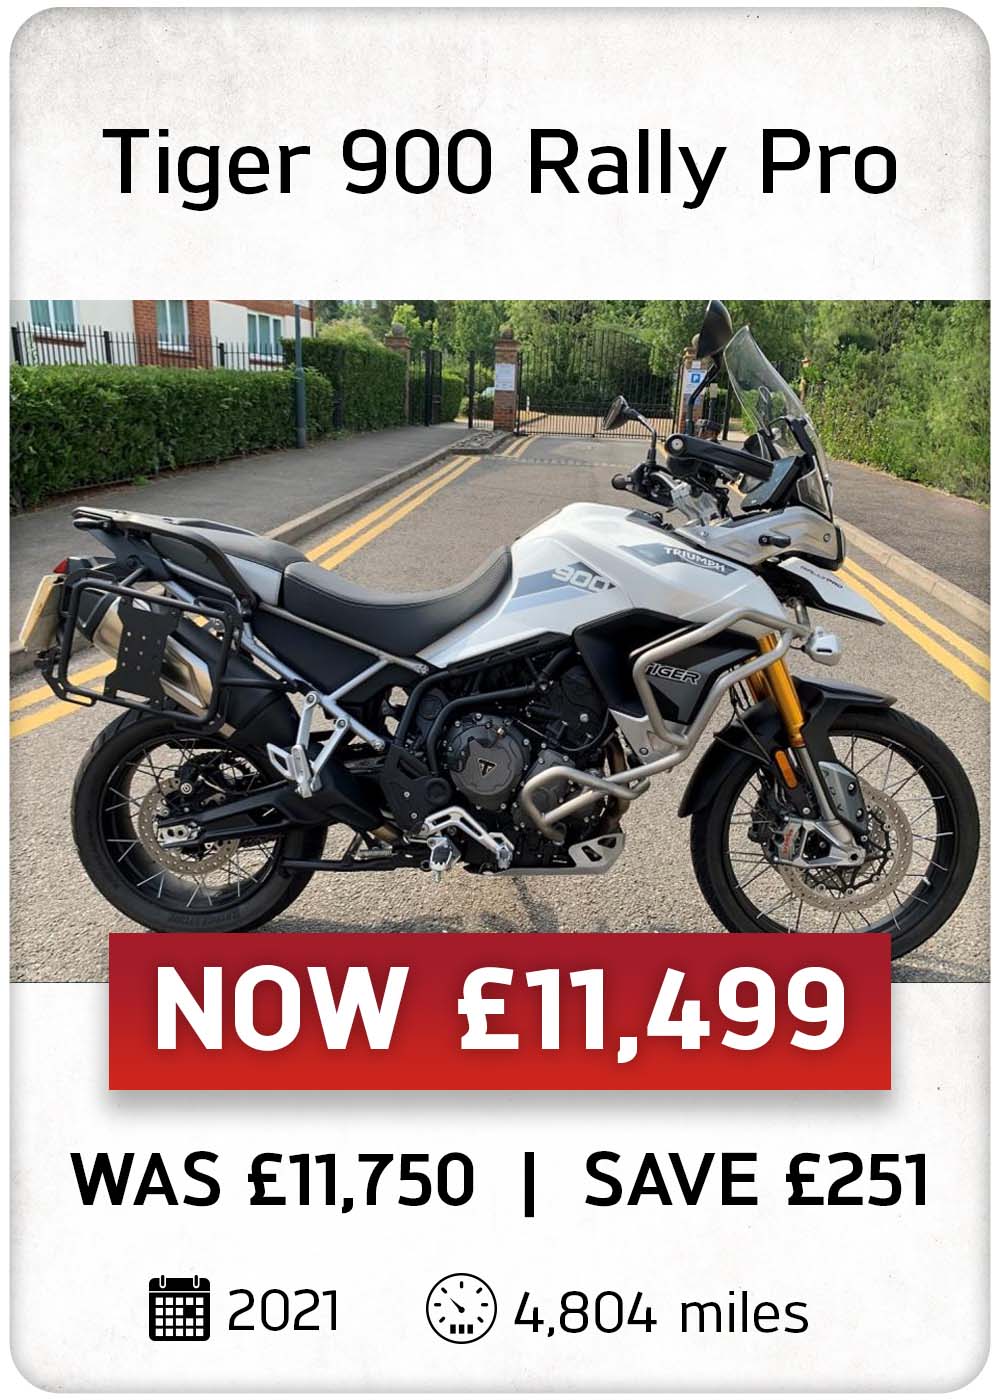 Triumph TIGER 900 RALLY PRO for sale in our Used Bike Specials at Laguna Motorcycles in Maidstone